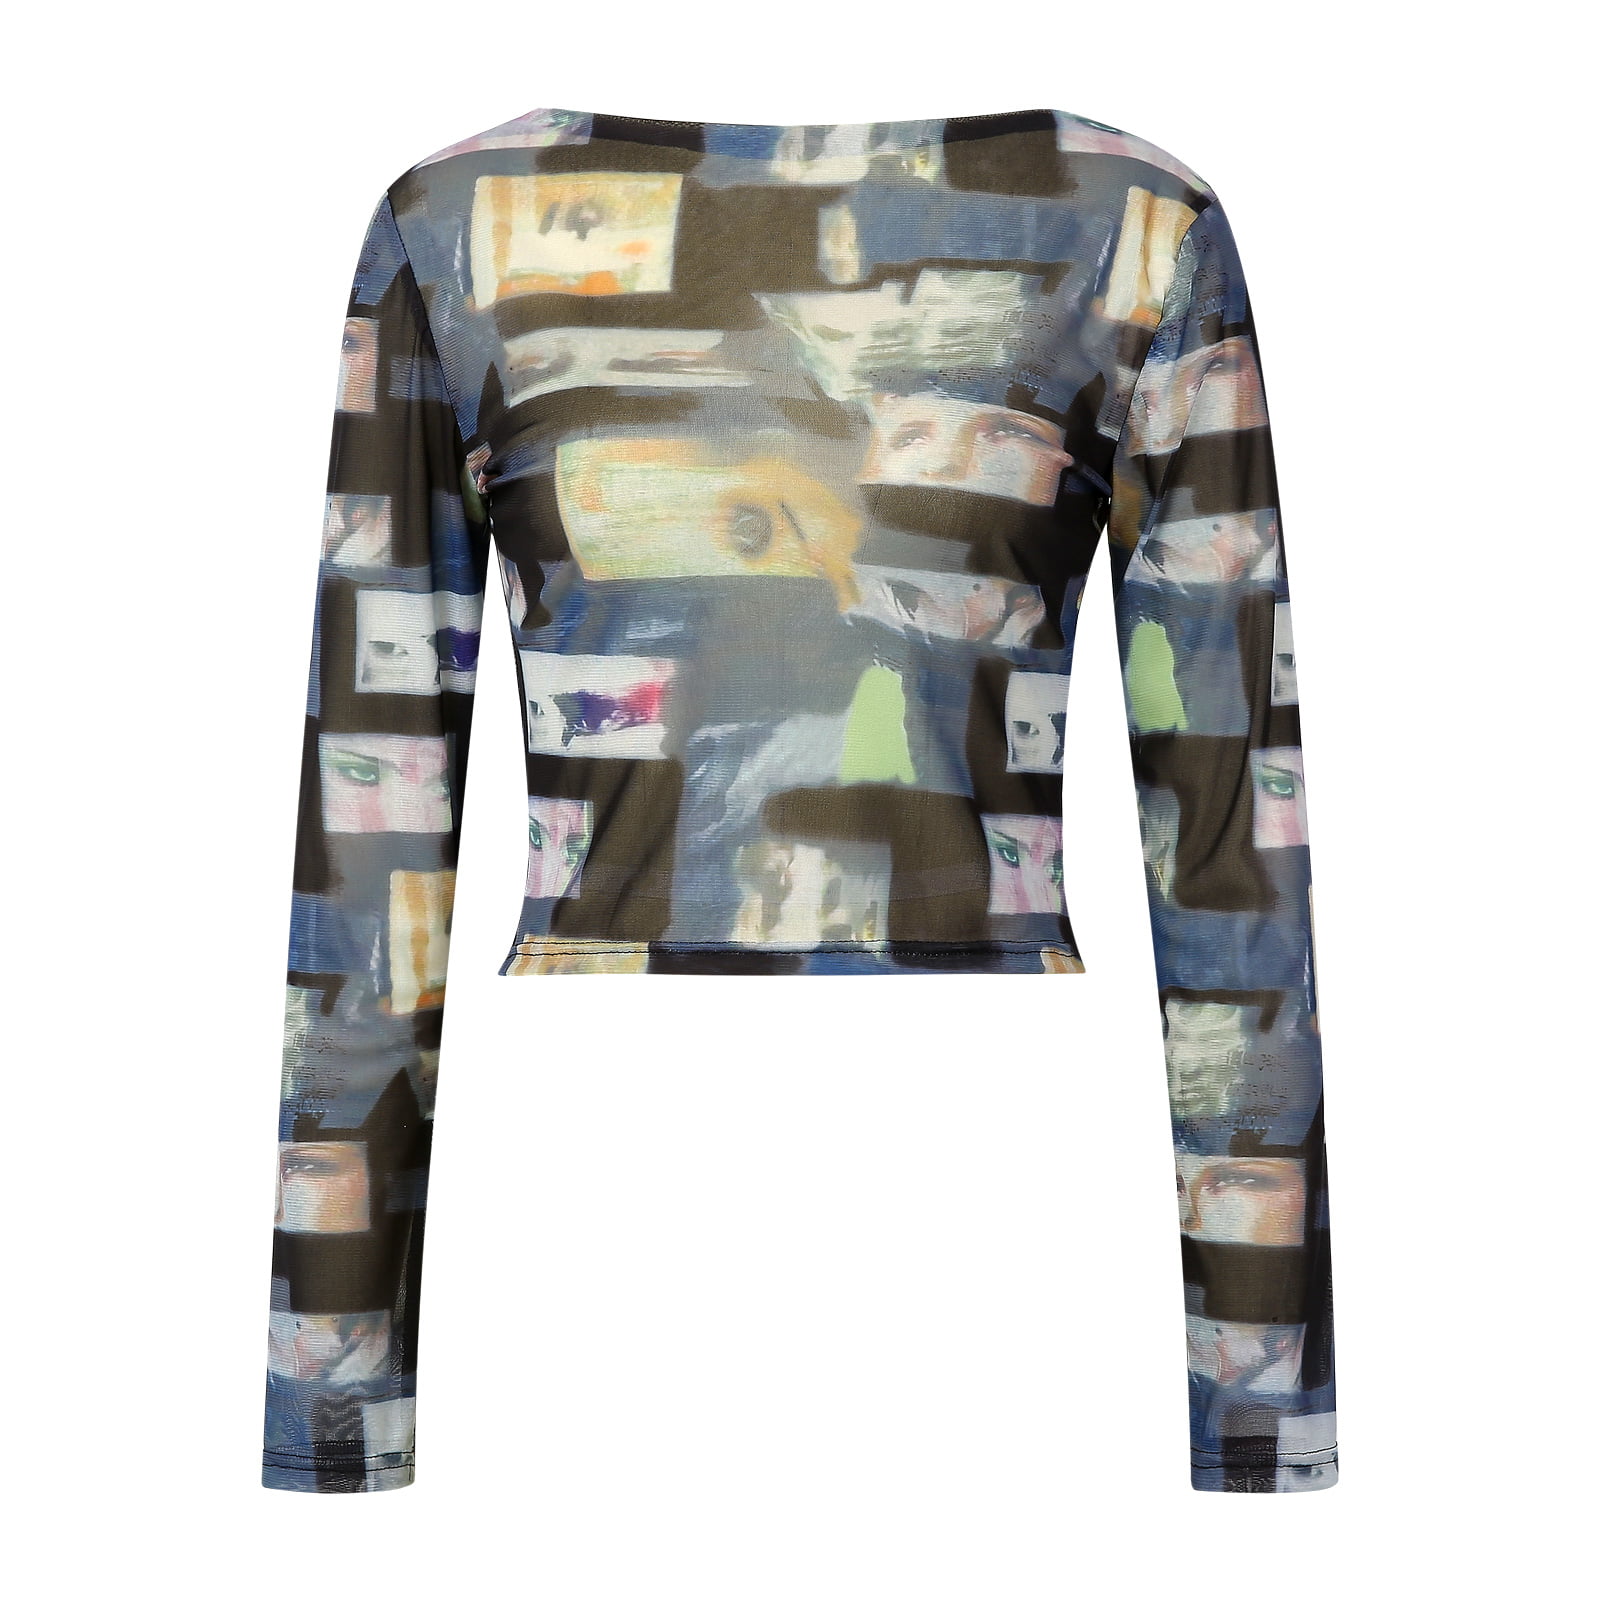 Vintage Graphic Mesh Long Sleeve Top 90s Y2K Abstract Print 